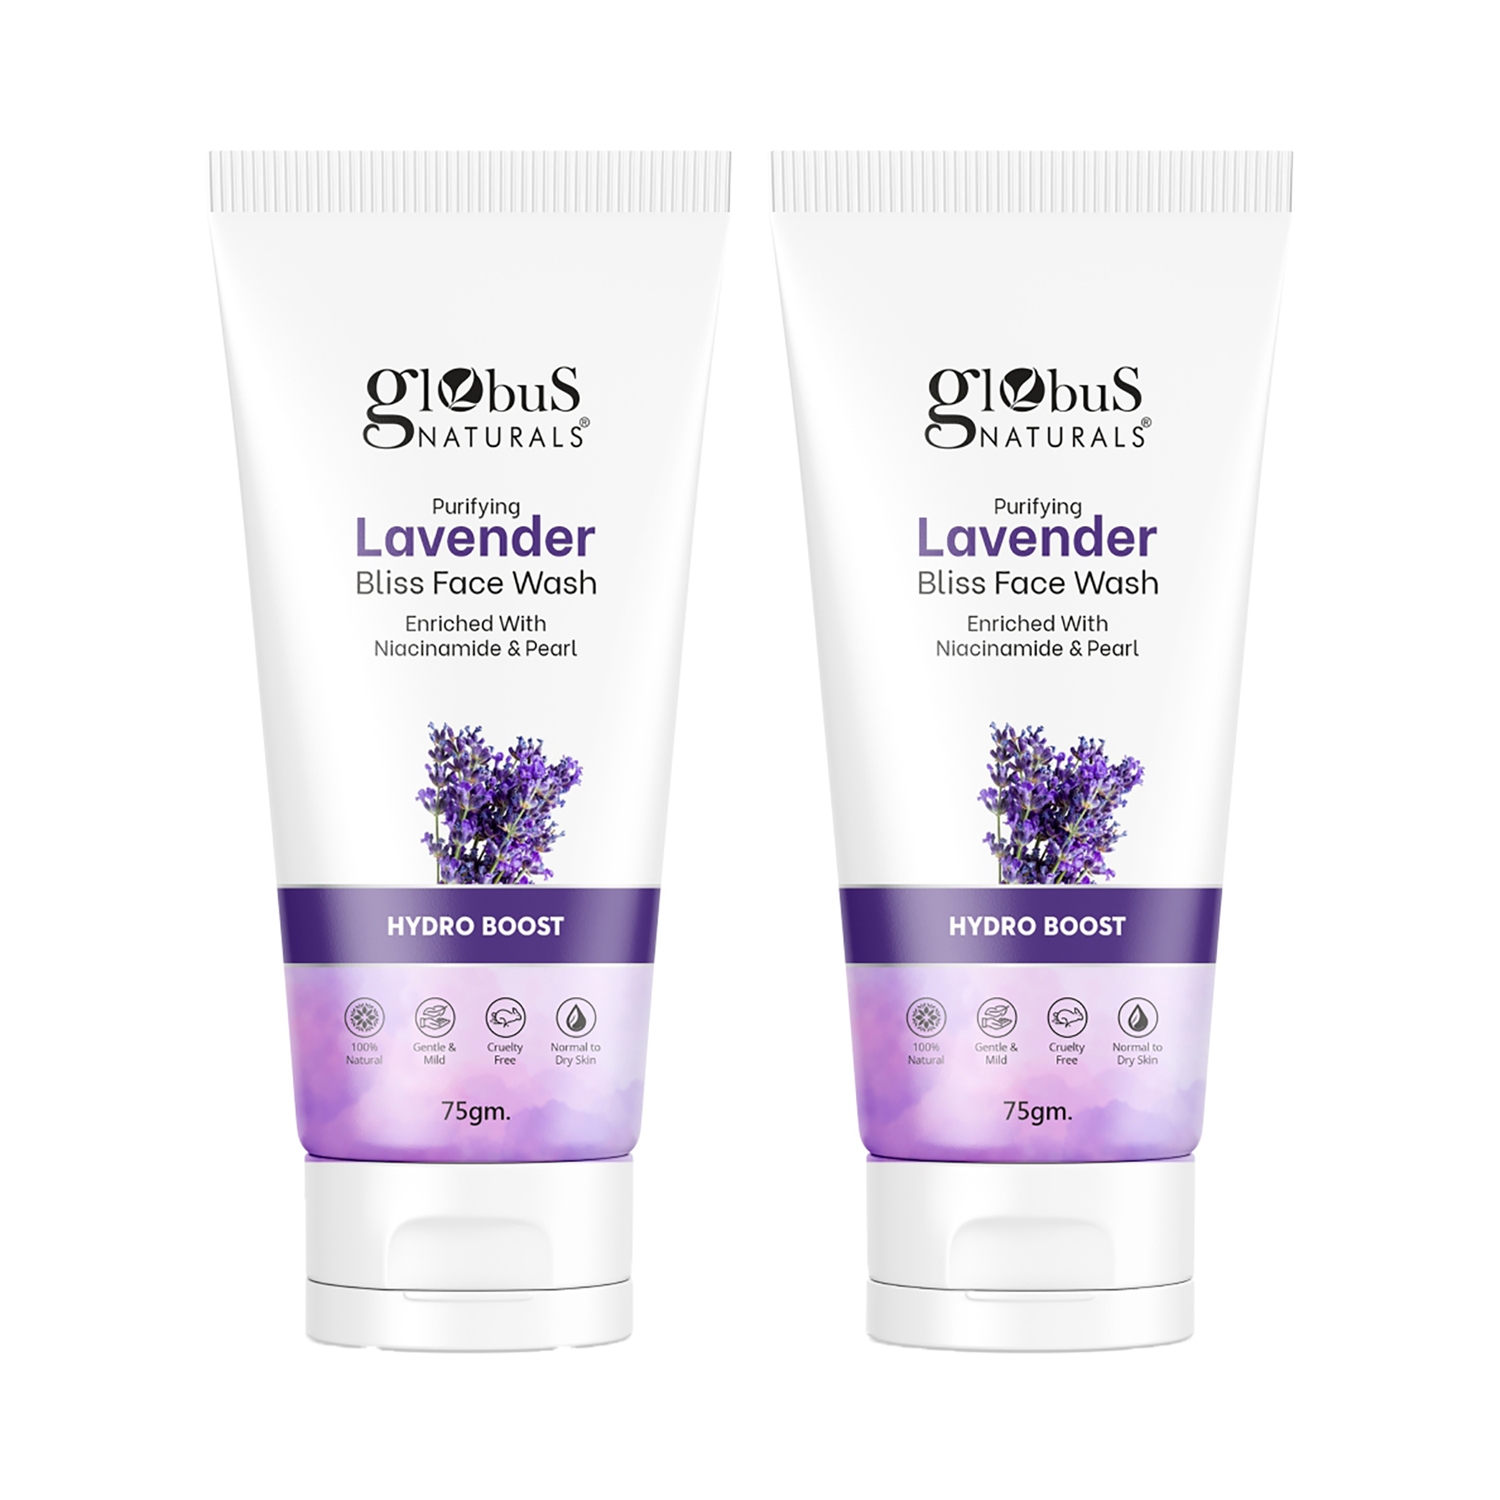 Globus Naturals | Globus Naturals Lavender Face Wash Enriched With Niacinamide & Pearl Hydro Boost Formula Combo (2 Pcs)